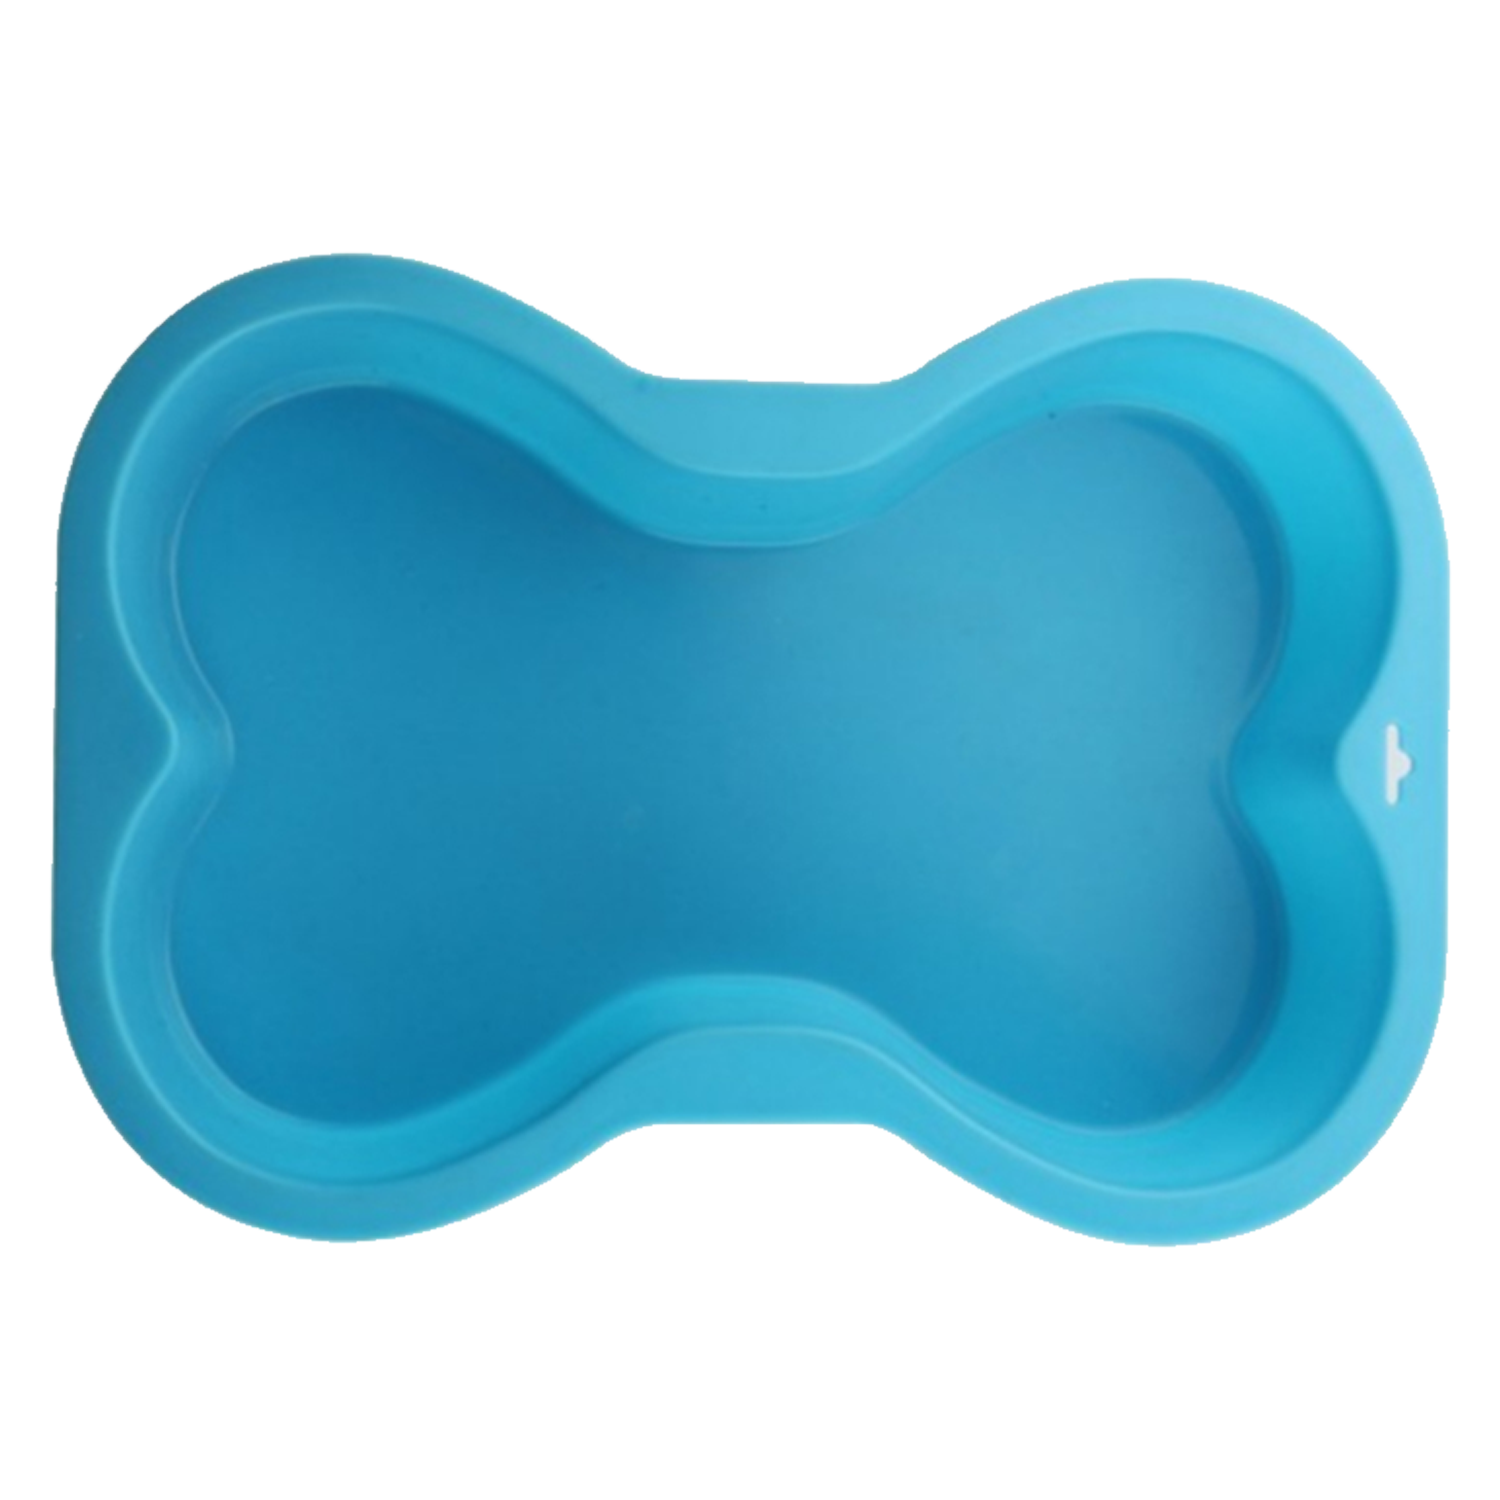 Pet Boutique - Dog Treats - Blue Silicone Bone Cake Pan for Dogs